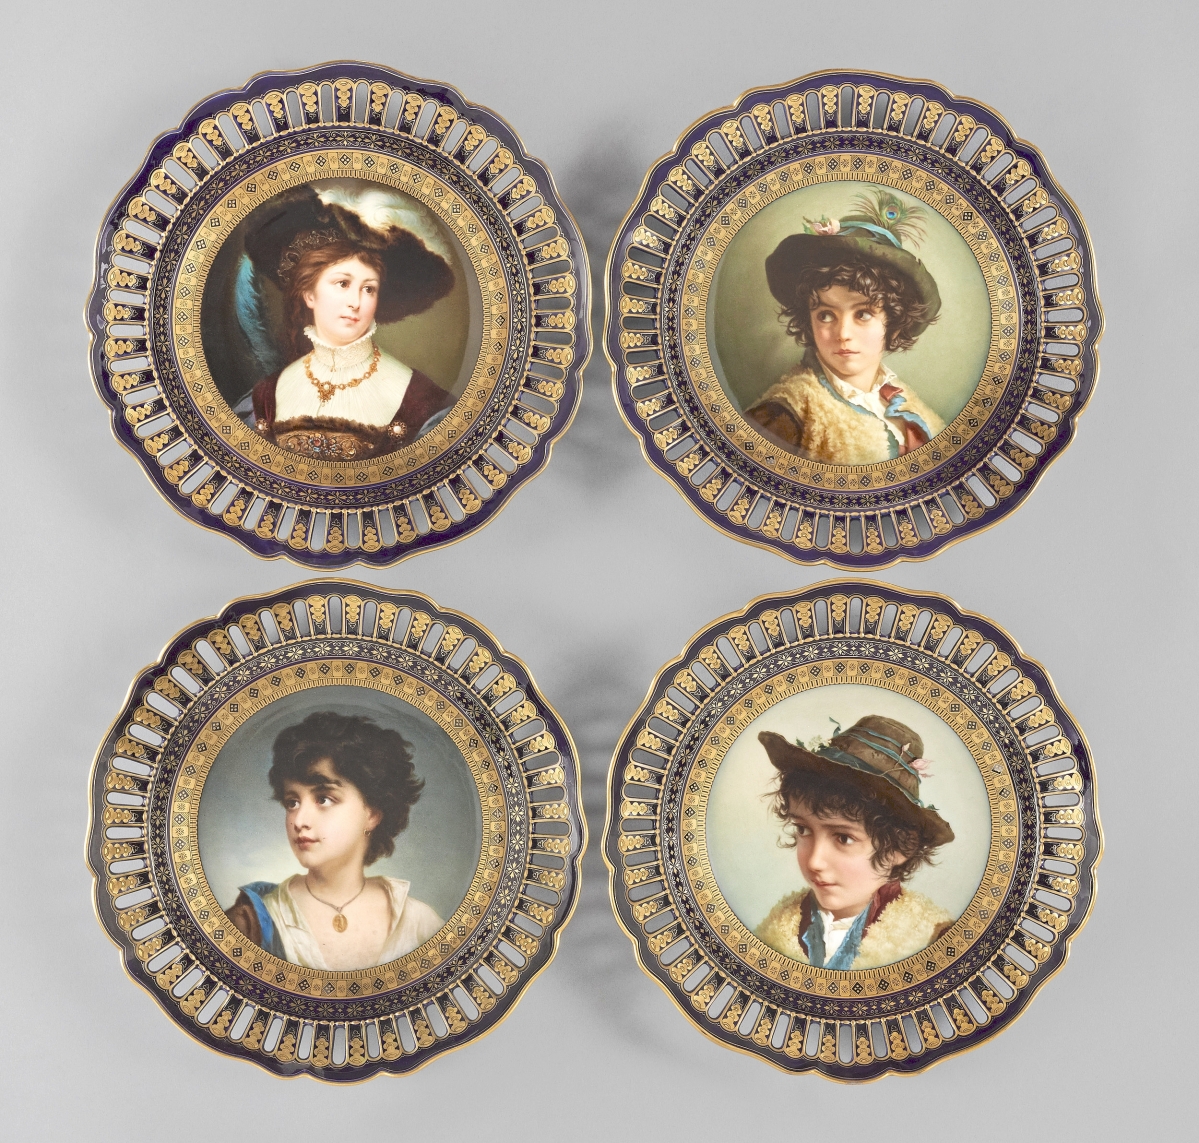 This set of four Meissen painted porcelain portrait plates brought more than ten times their high estimate and closed at $32,760 ($ ,000).